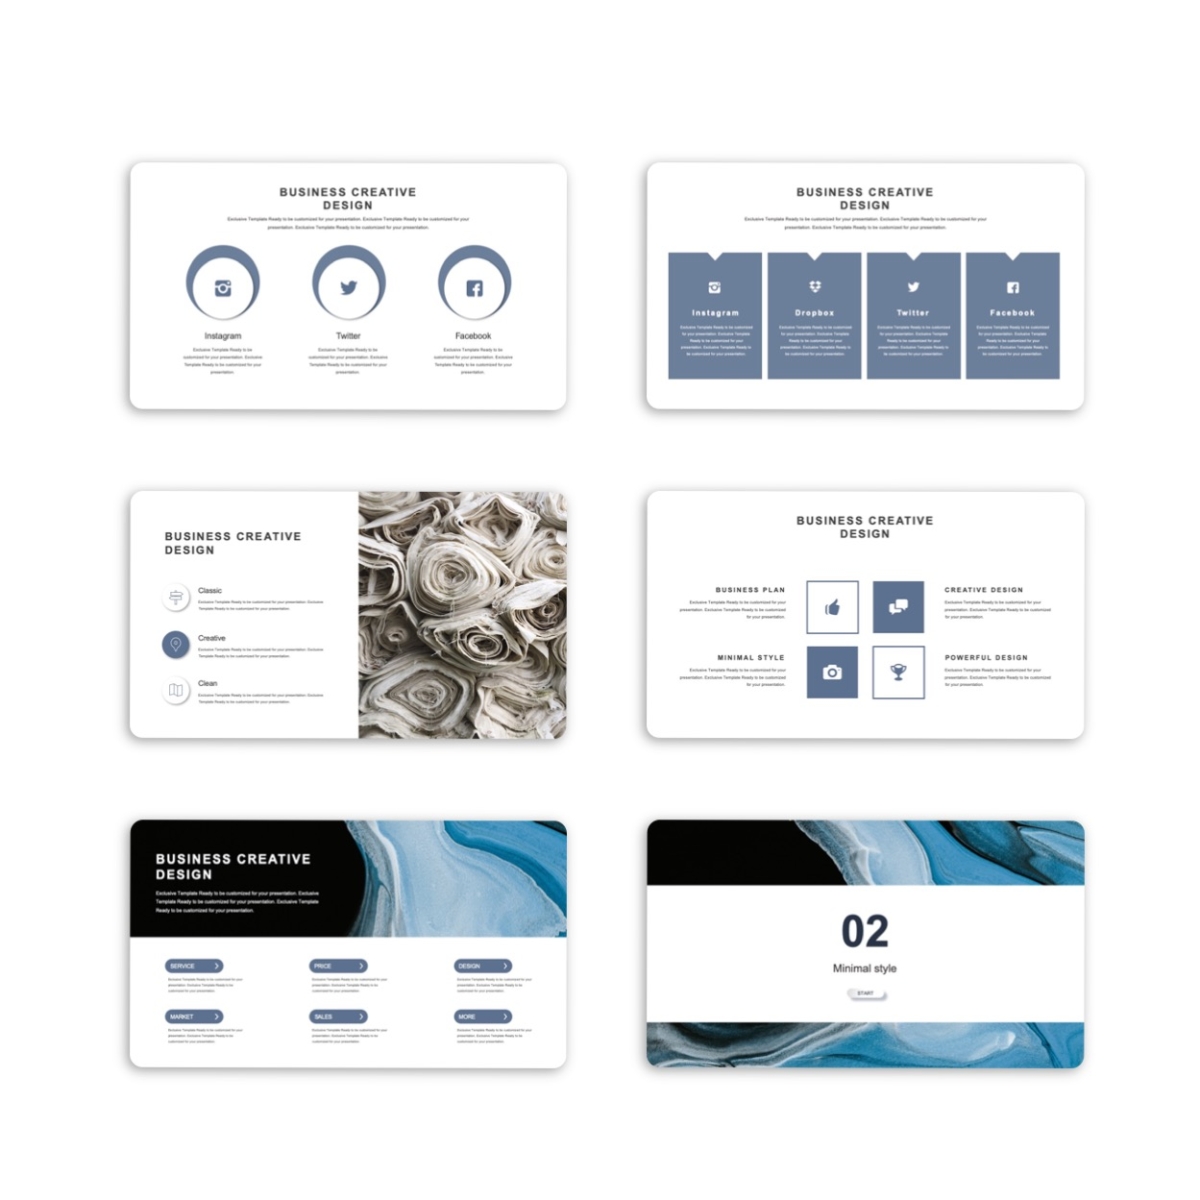 Annual Report Business Report Presentation Template